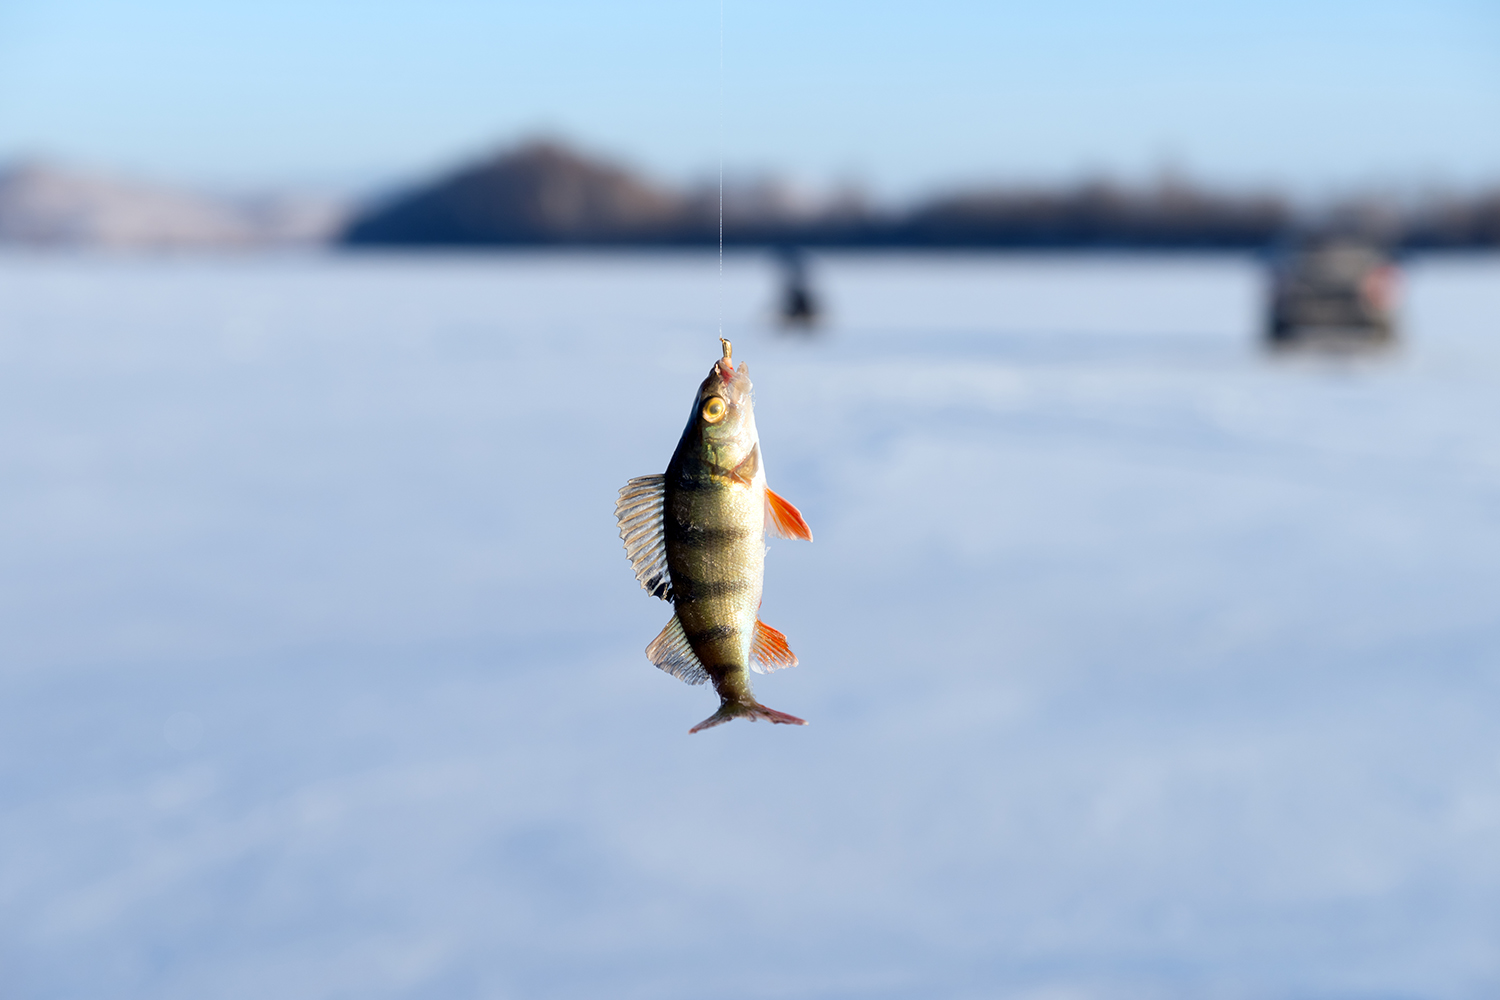 A fish dangles from a line in a snowy landscape.